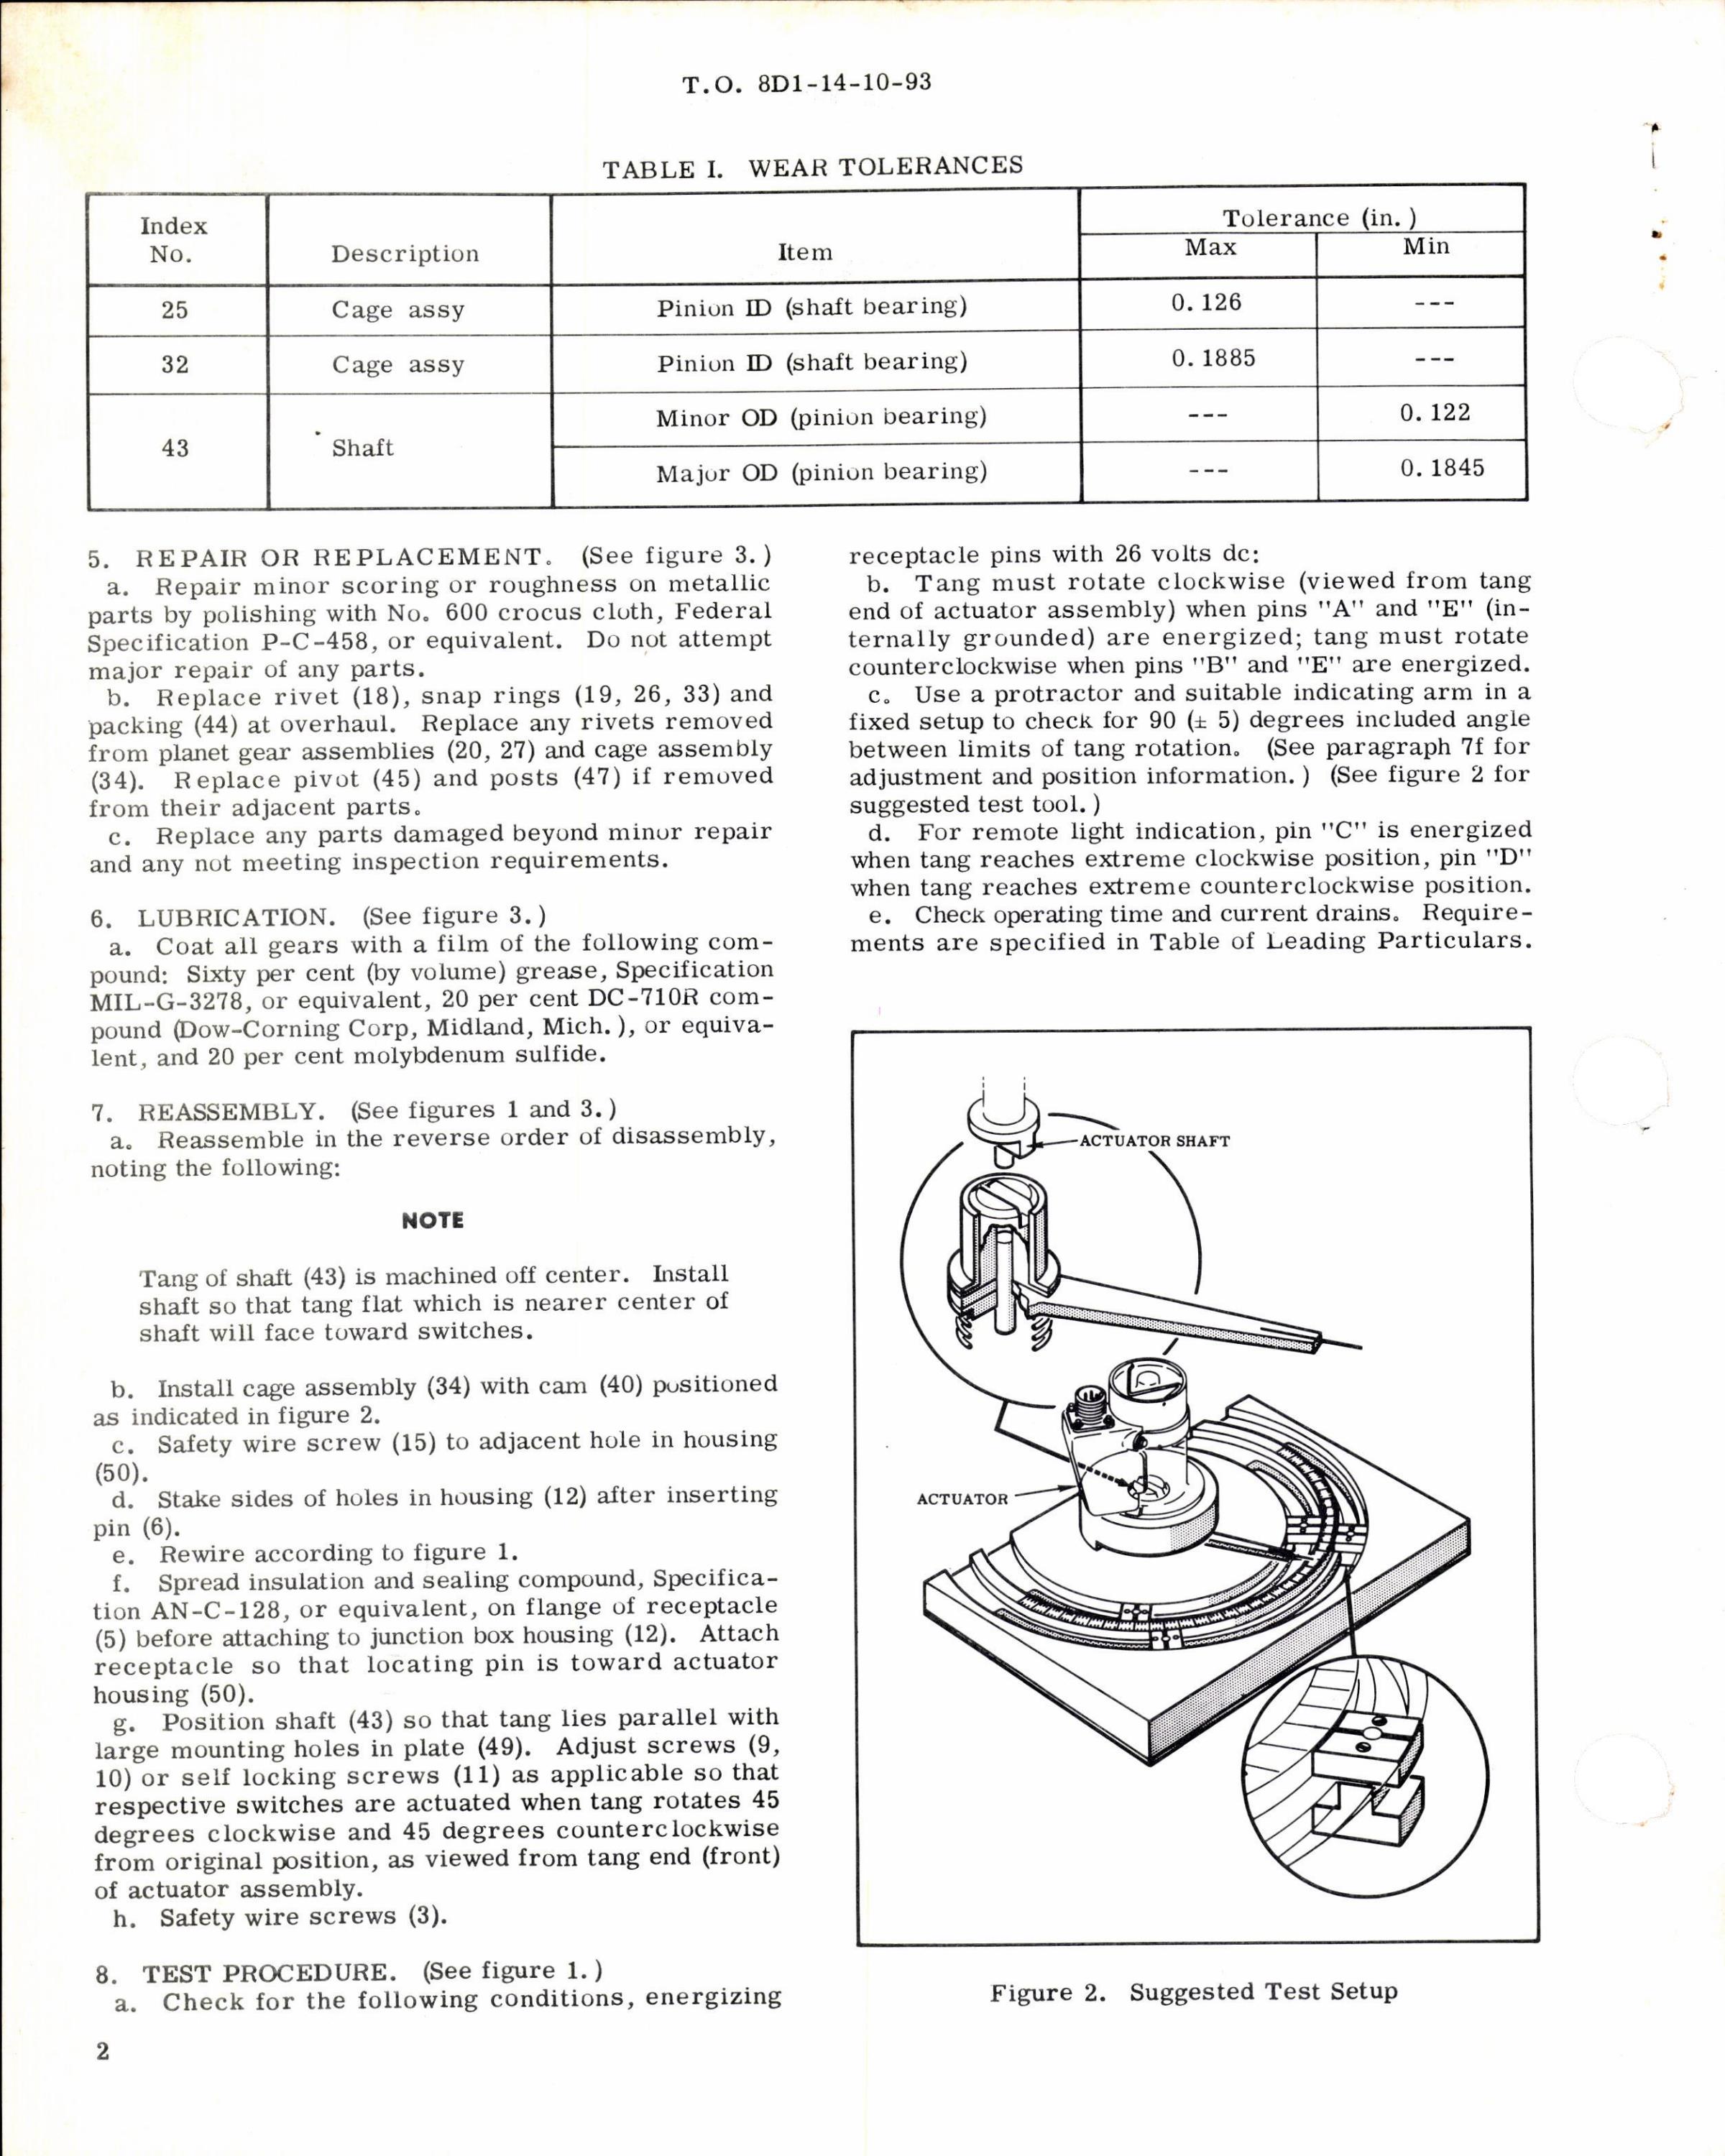 Sample page 2 from AirCorps Library document: Instructions w Parts Breakdown for Actuator Assembly Part 108392